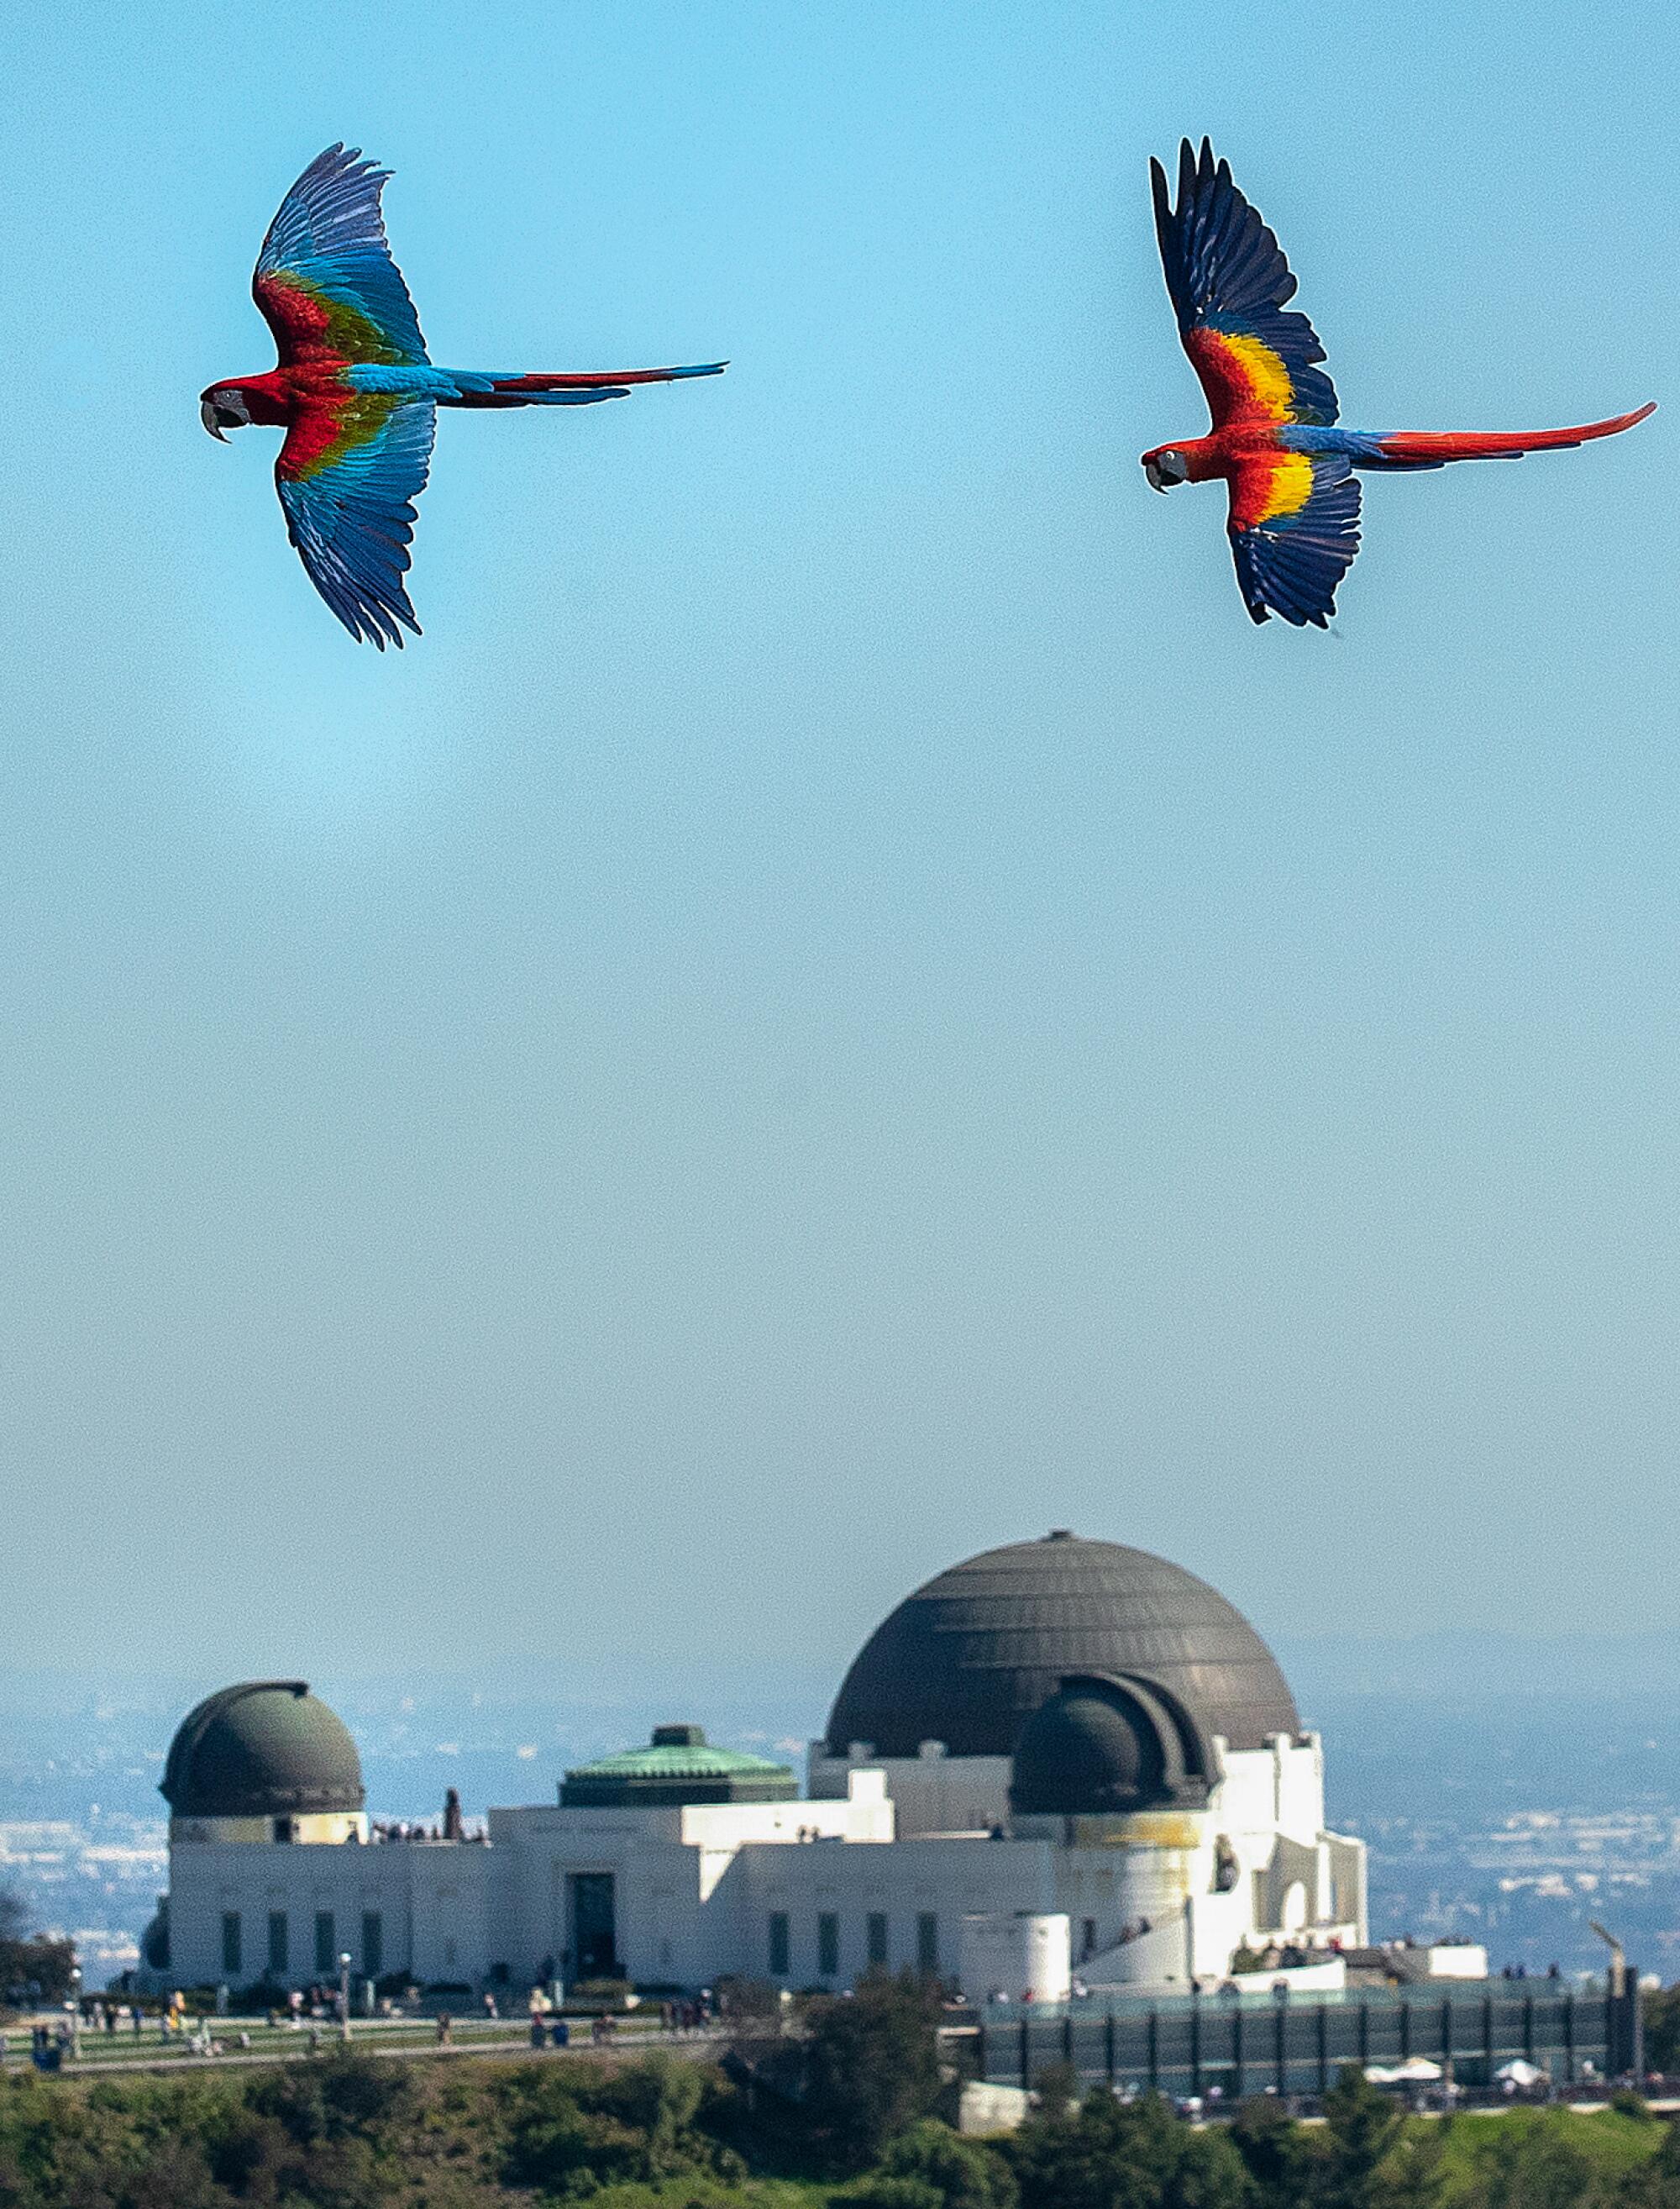 Two macaws fly over the Griffith Observatory.